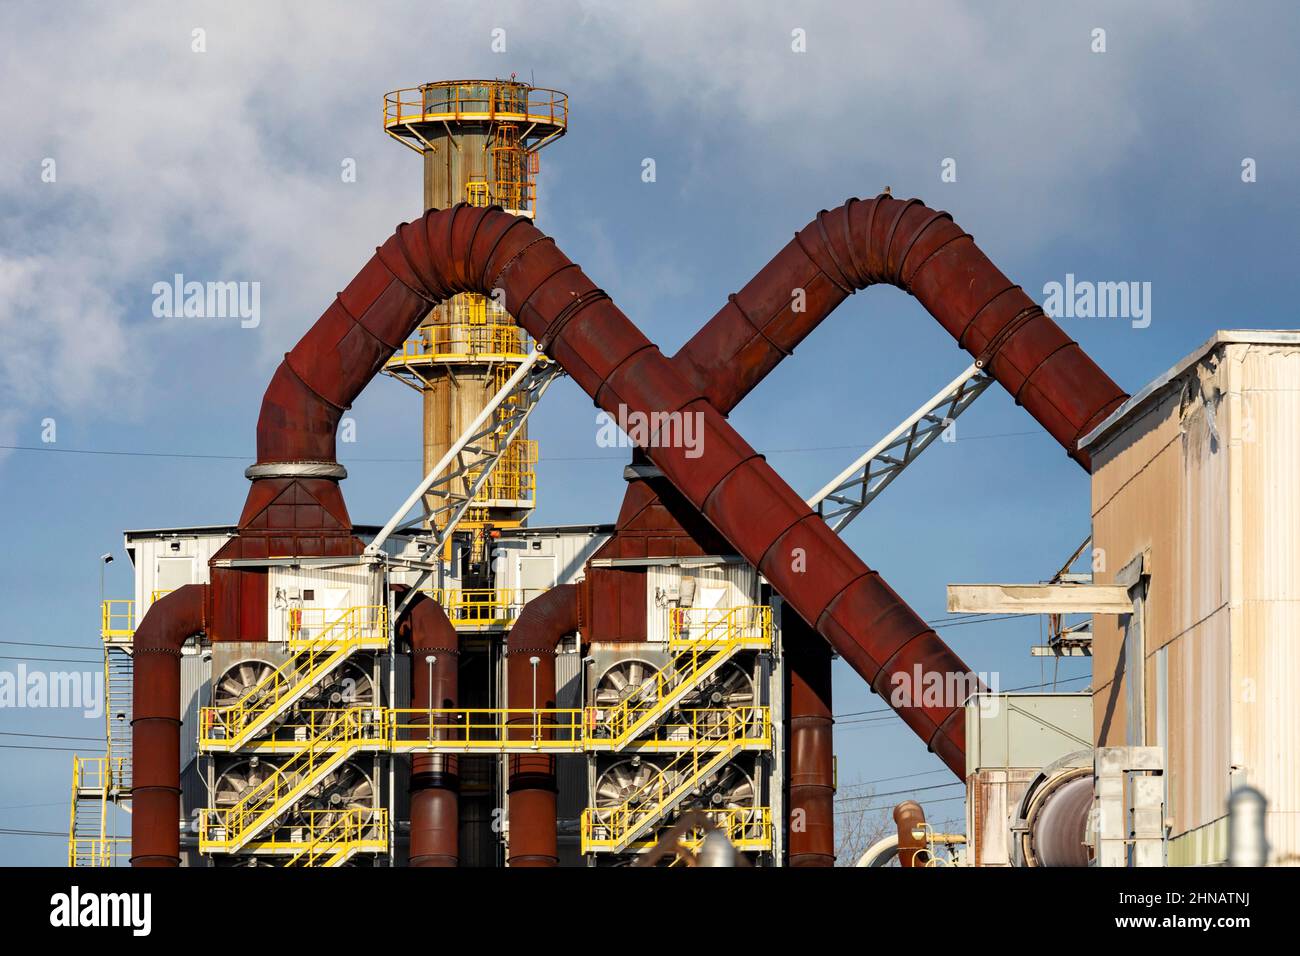 River Rouge, Michigan - The Carmeuse Lime factory. Stock Photo